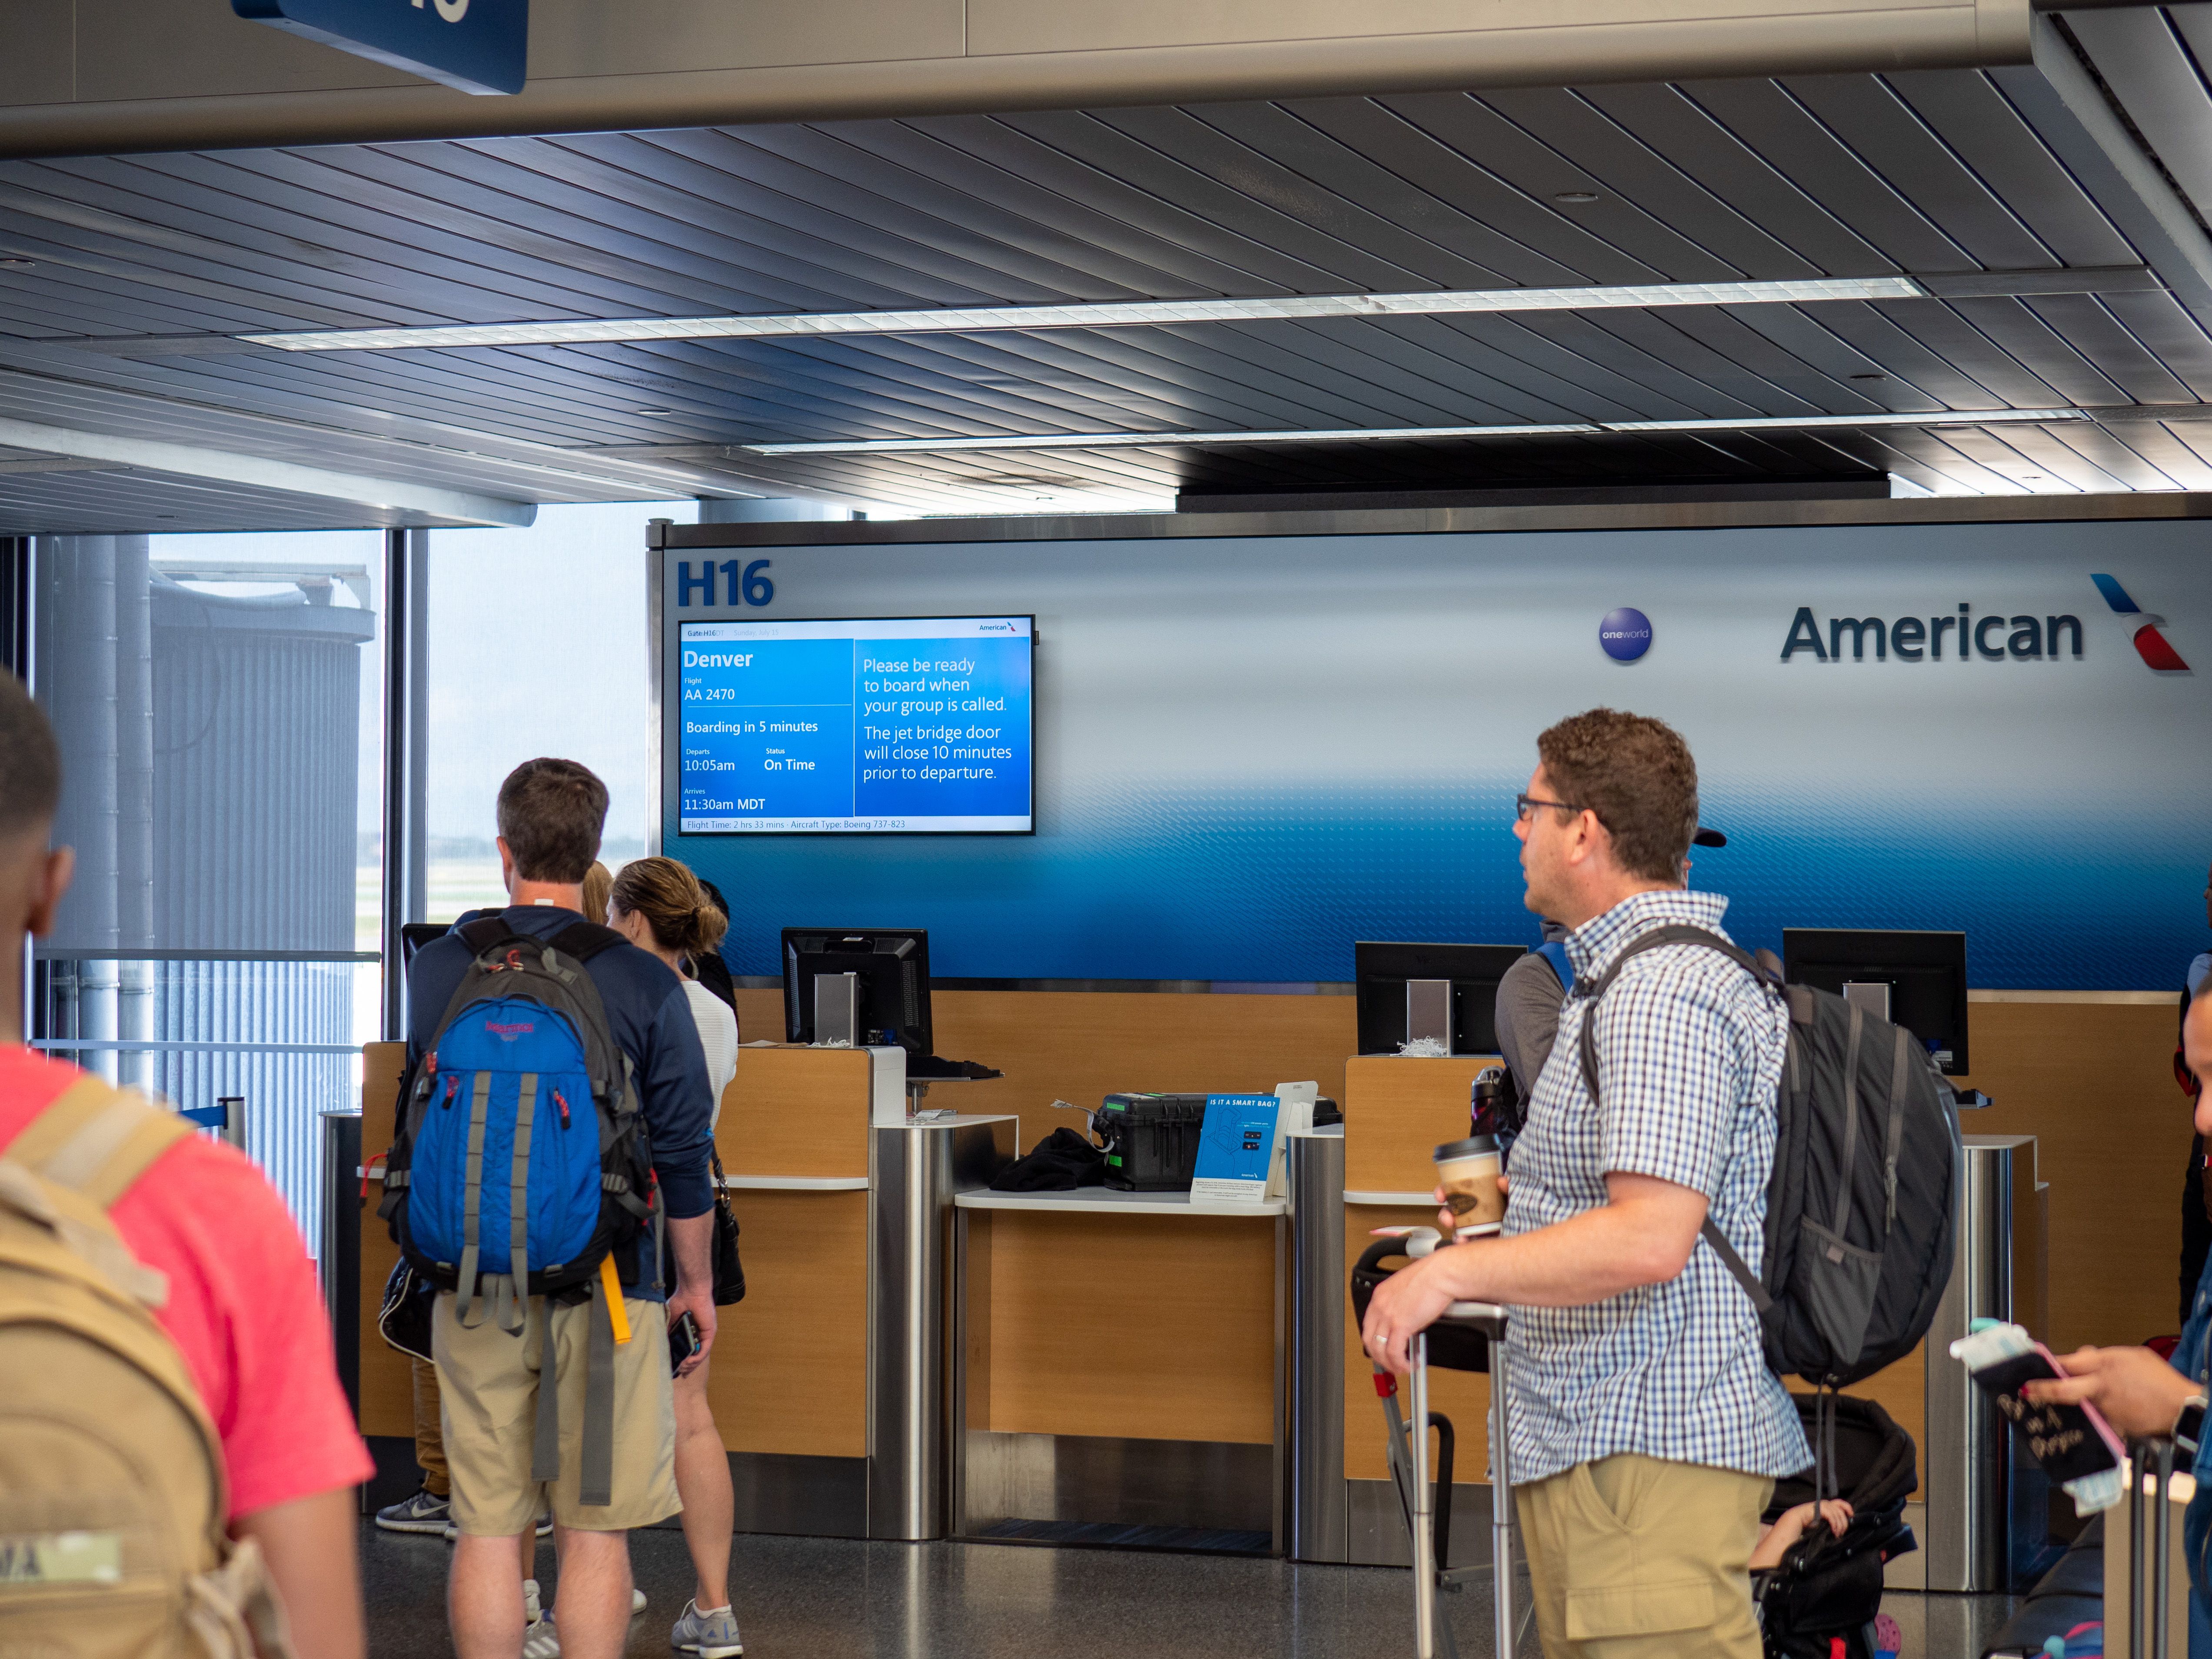 Several passengers at a gate waiting for an American Airlines flight.